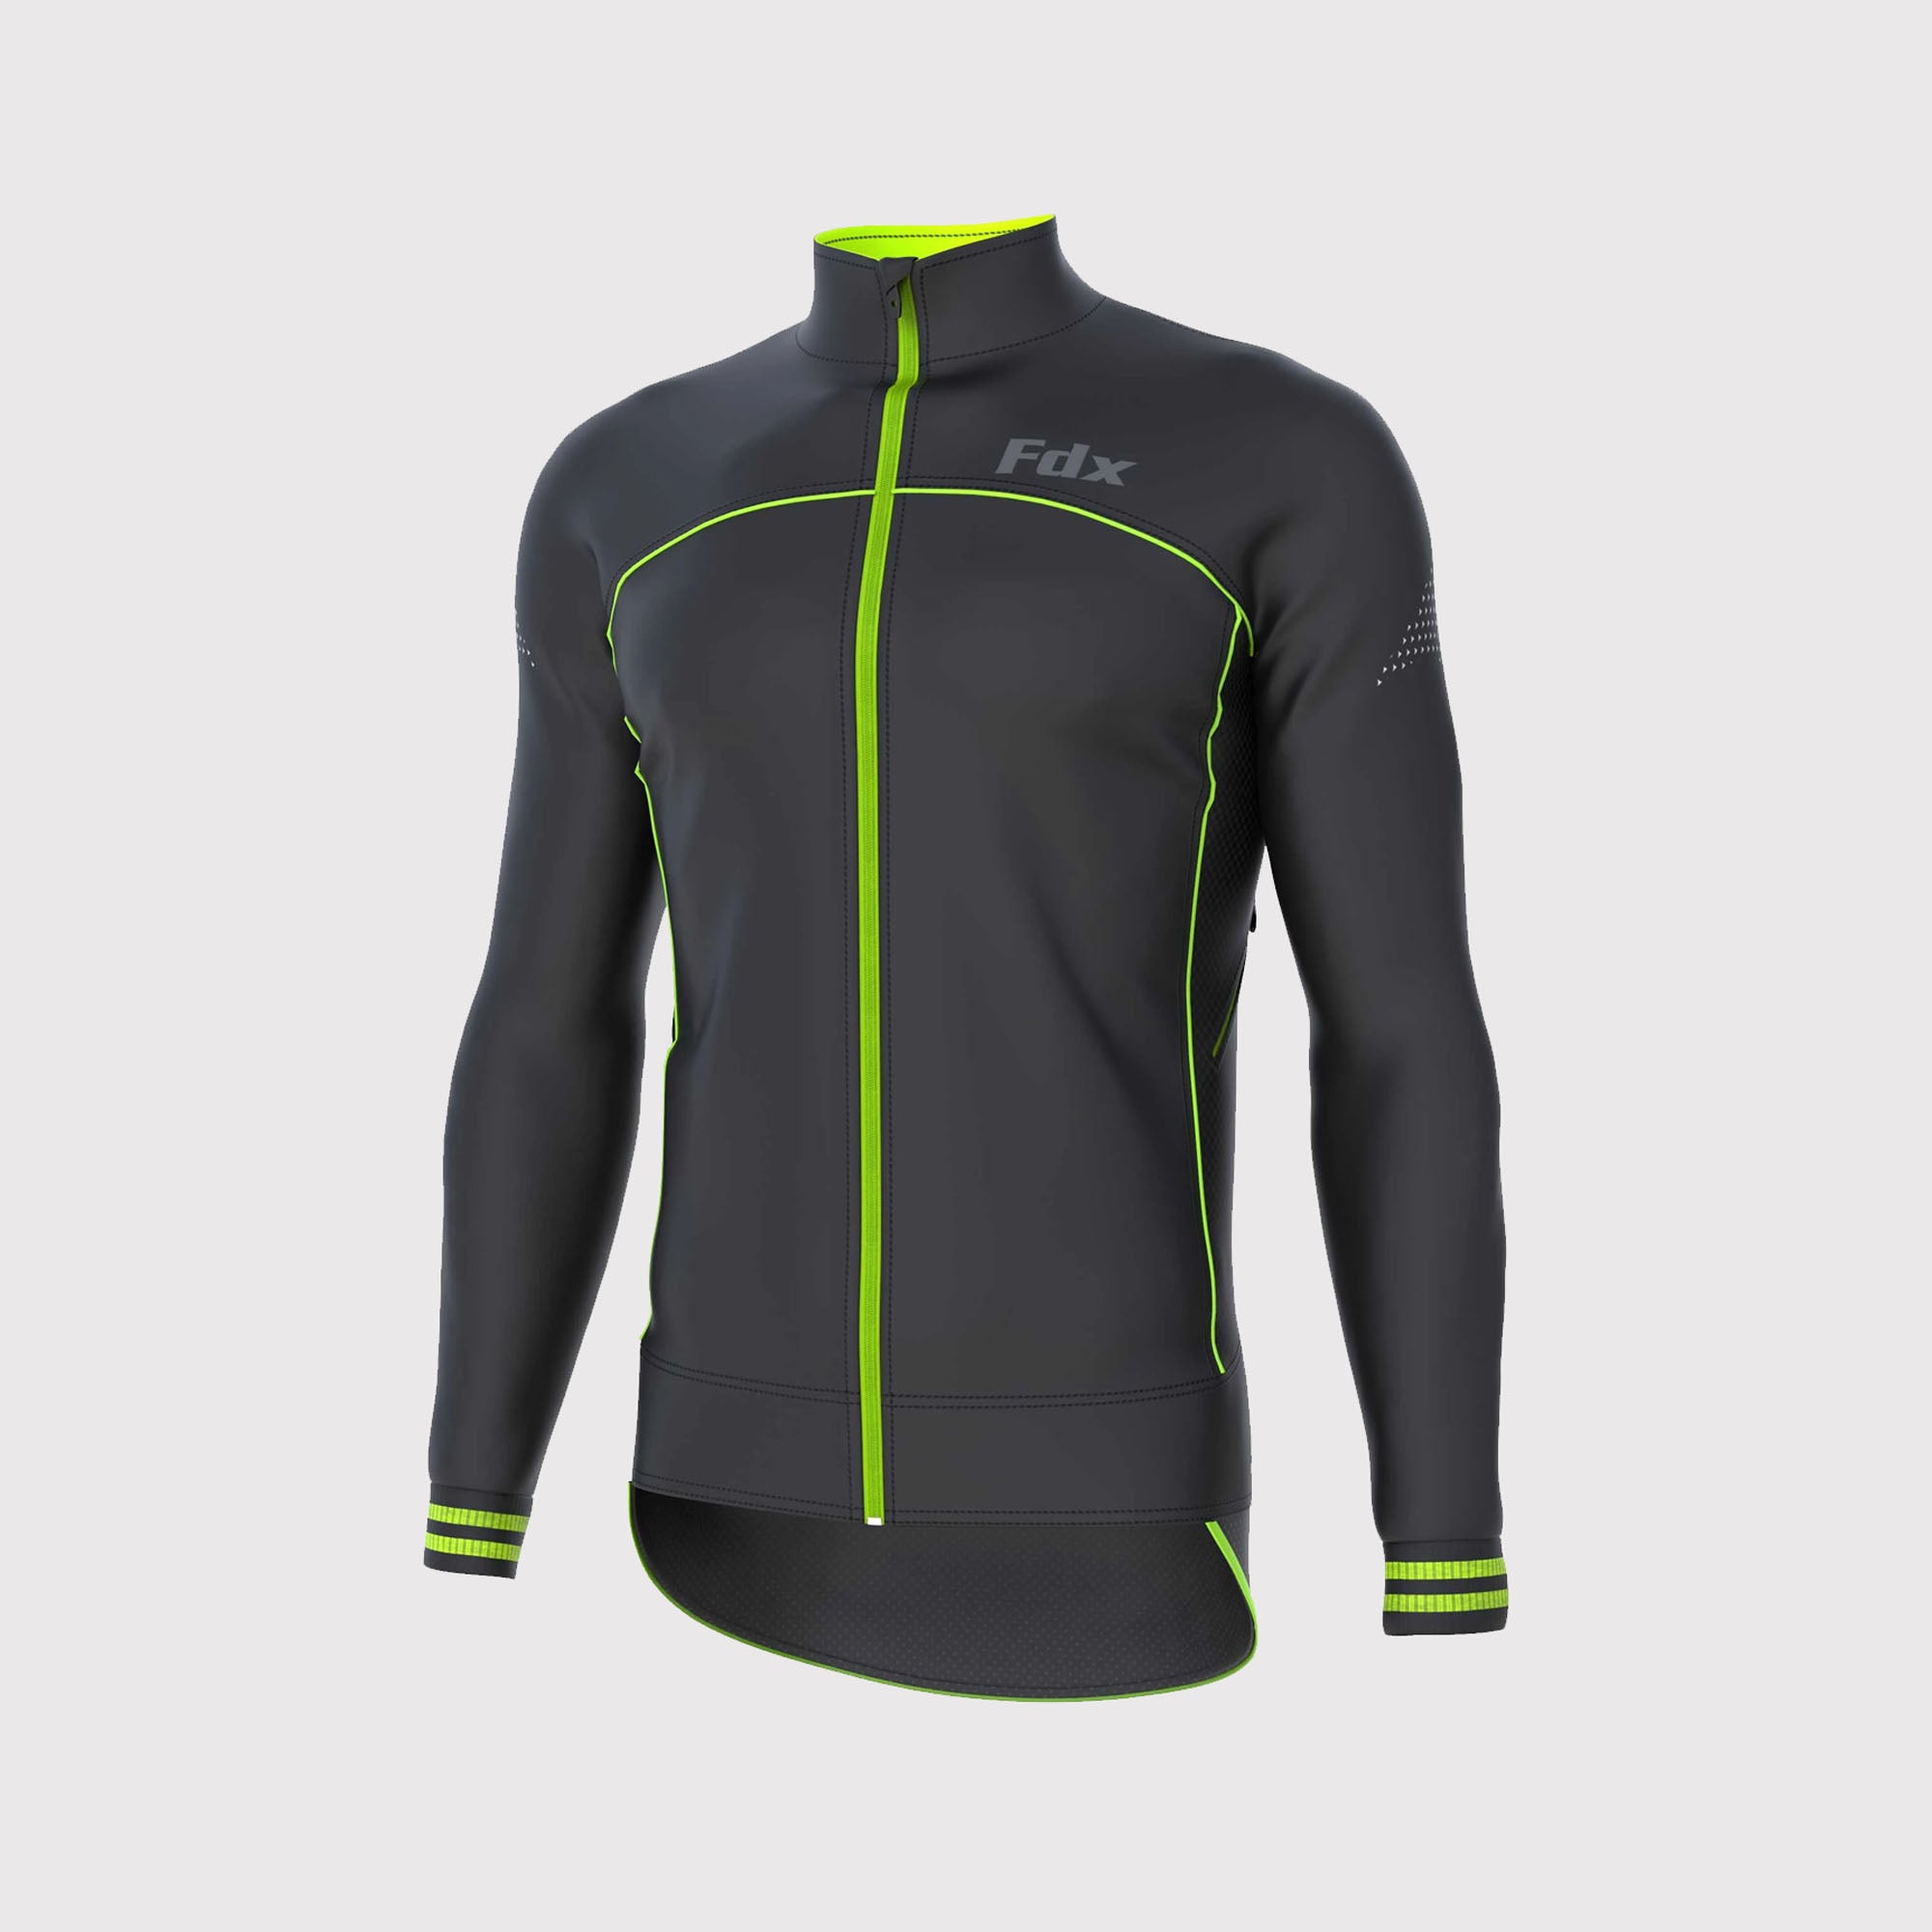 Fdx Mens Black & Green Cycling Jacket for Winter Thermal Casual Softshell Clothing Lightweight, Windproof, Waterproof & Pockets - Apollux